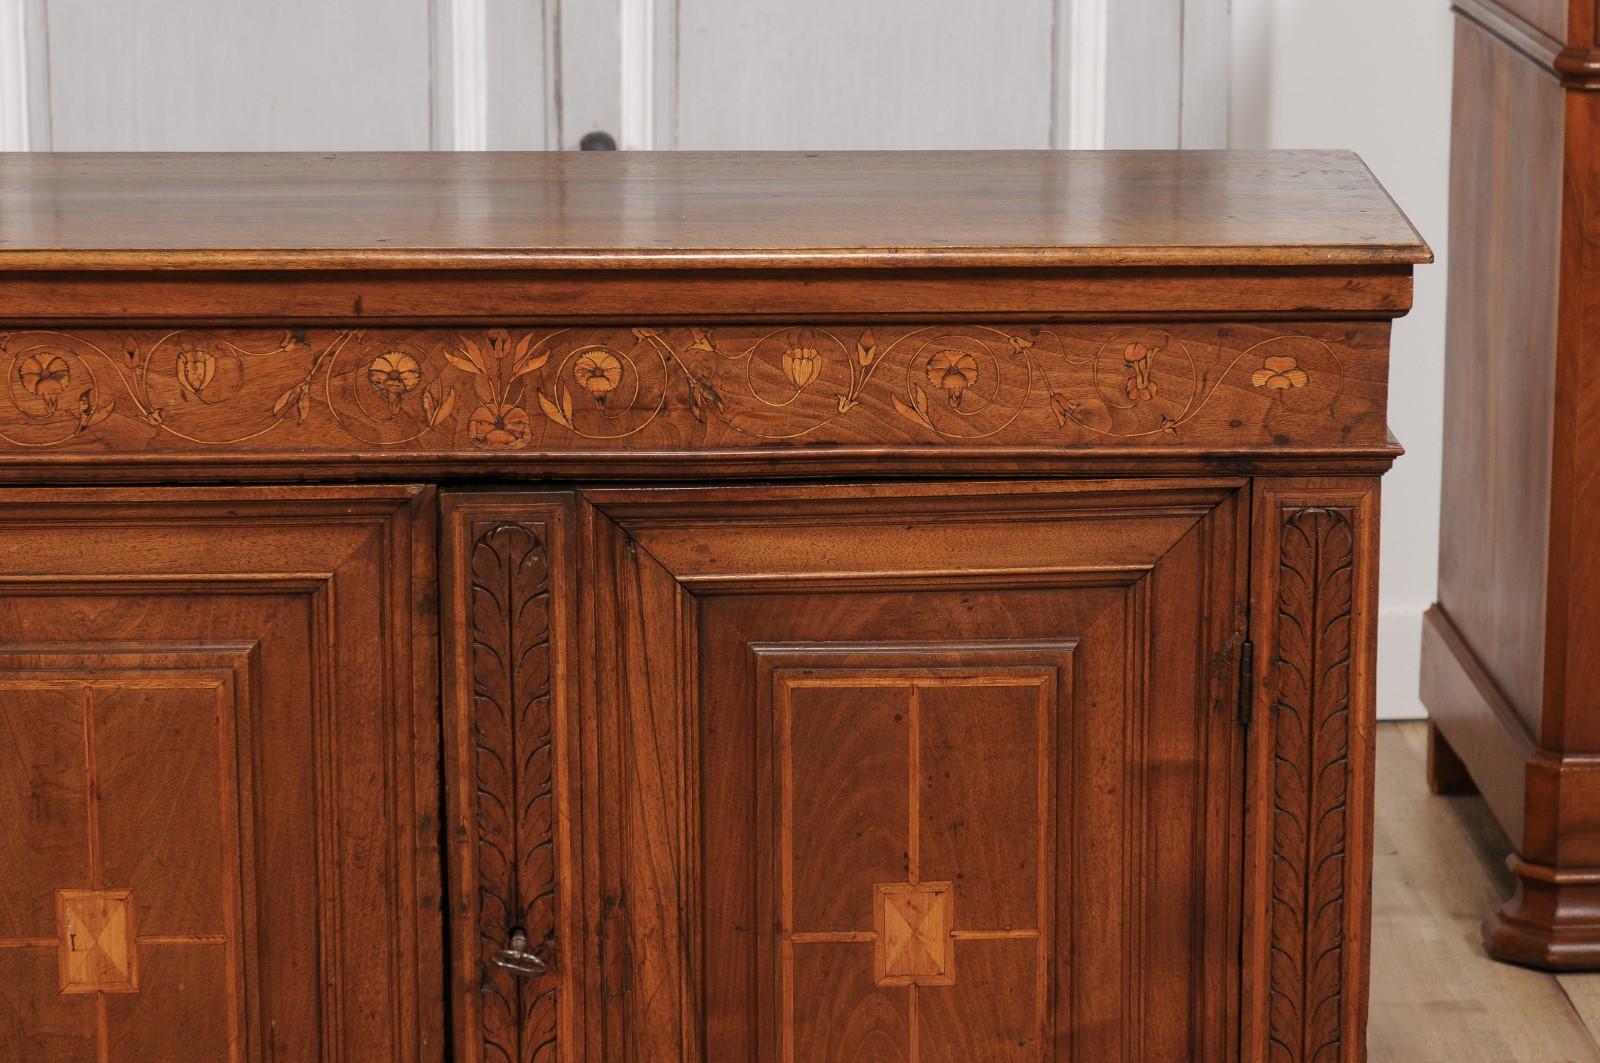 Italian 1620s Walnut Buffet with Floral Marquetry Scrollwork and Inlaid Doors For Sale 6